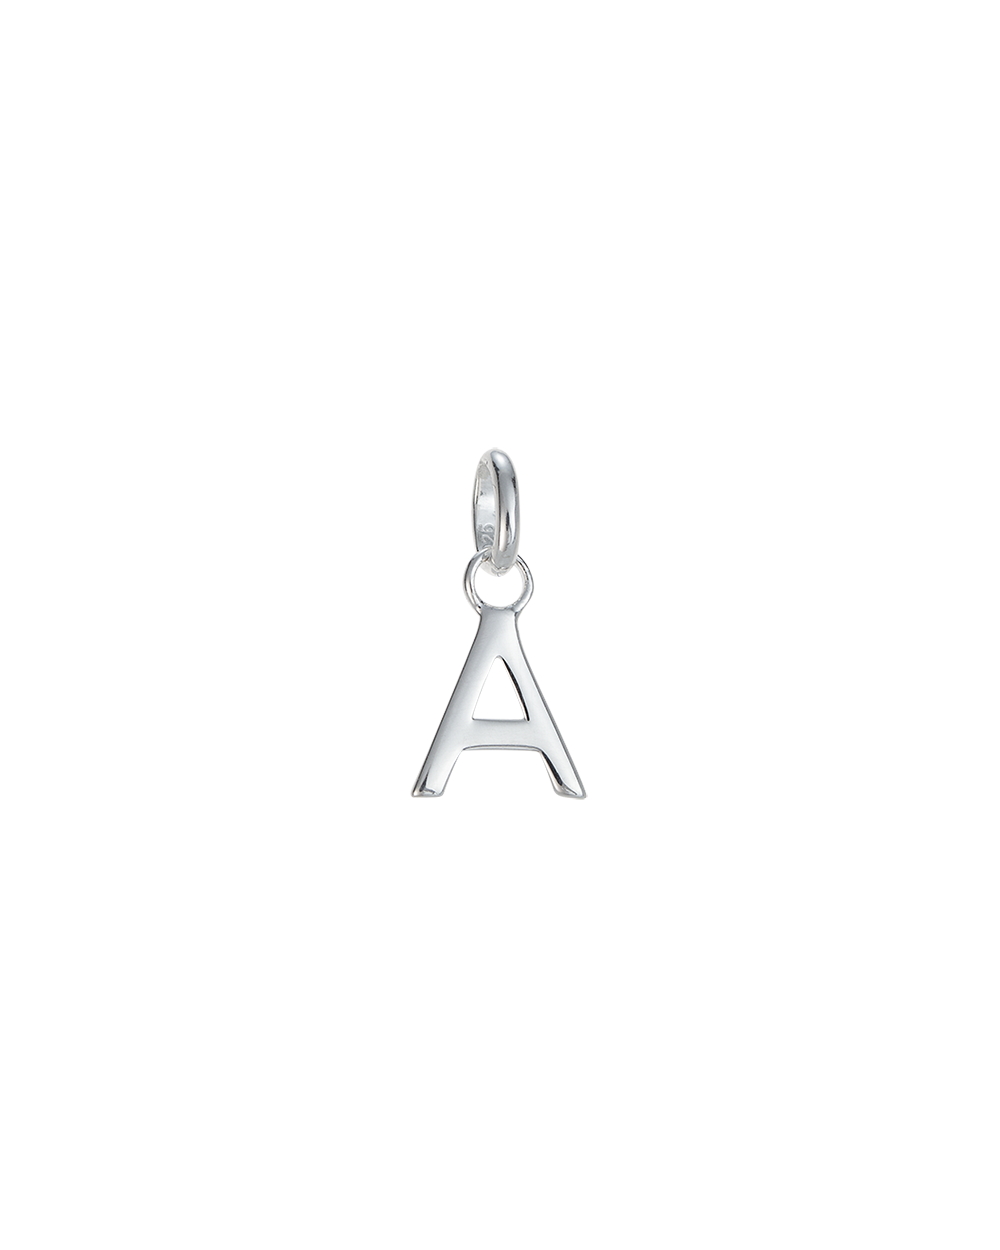 OUTLINE INITIAL A-Z (STERLING SILVER) - IMAGE 1